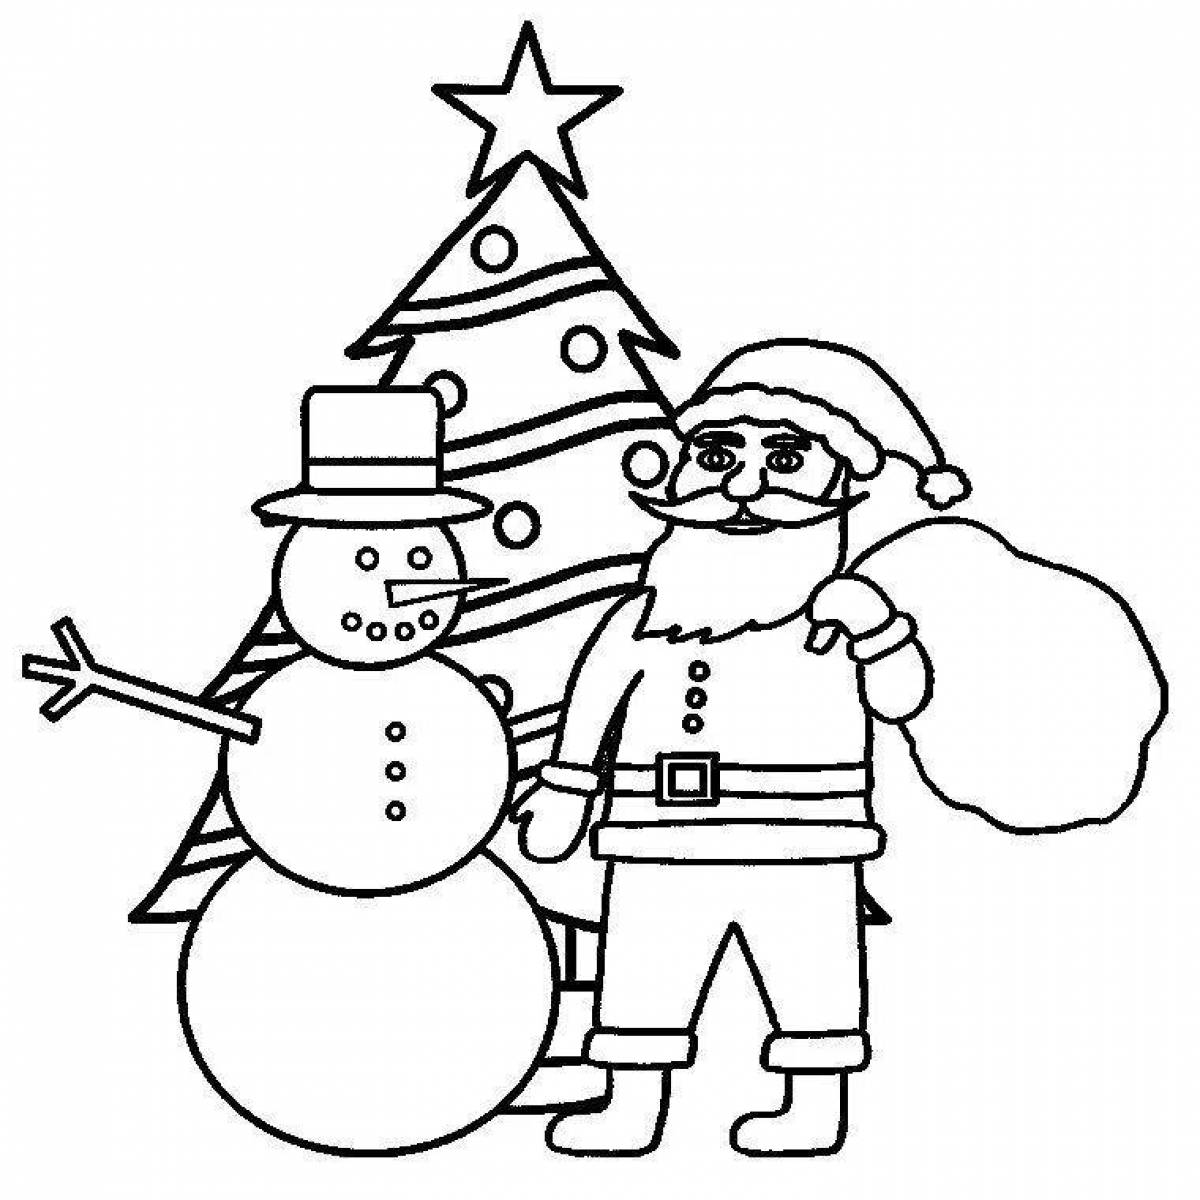 Glittering Christmas tree coloring page